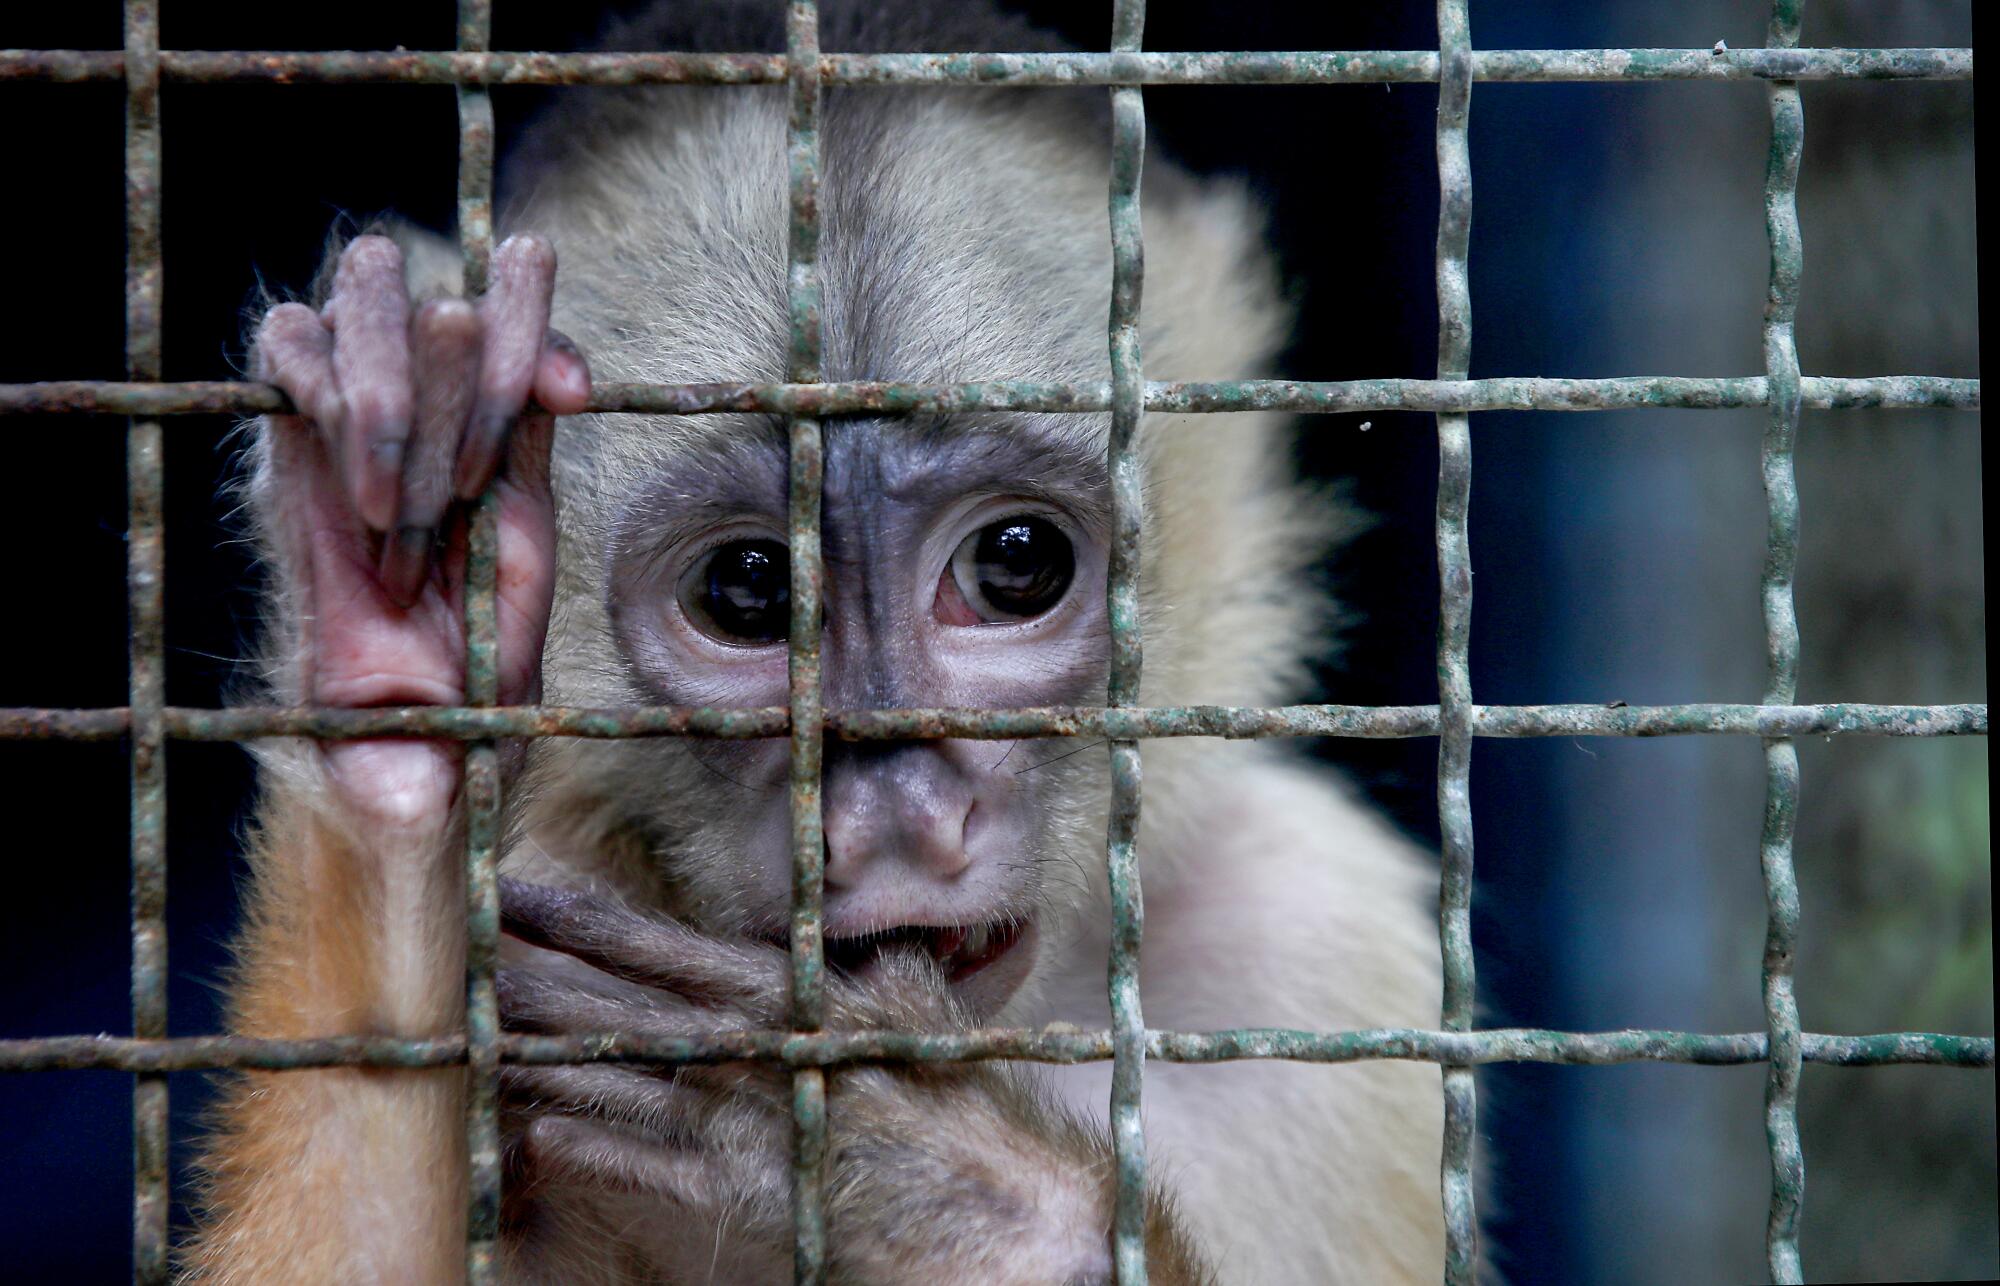 A primate looks out from its cage 